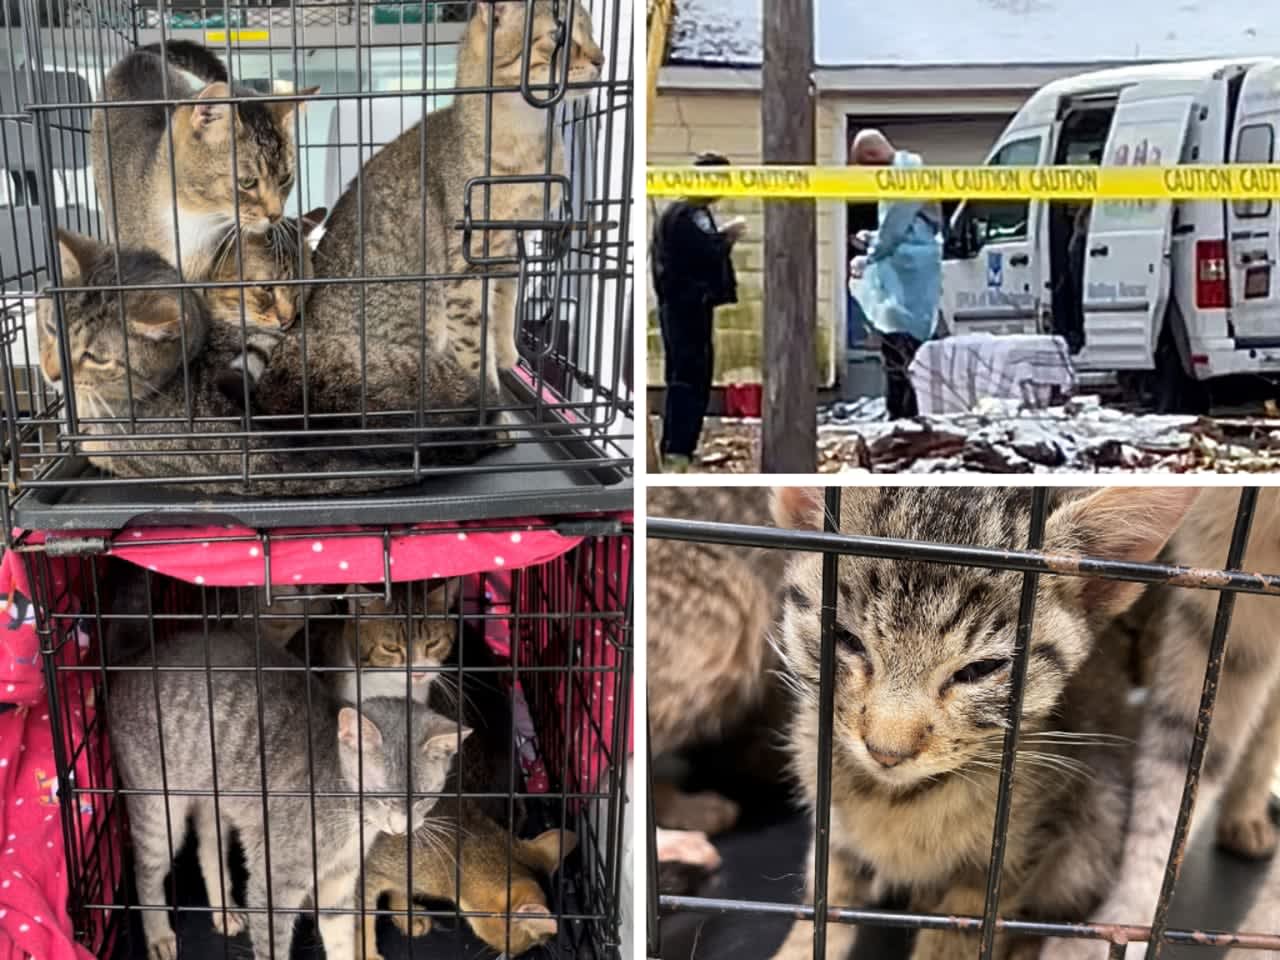 150 cats were found living in squalor at a home in Yorktown after police discovered the two occupants dead during a welfare check.